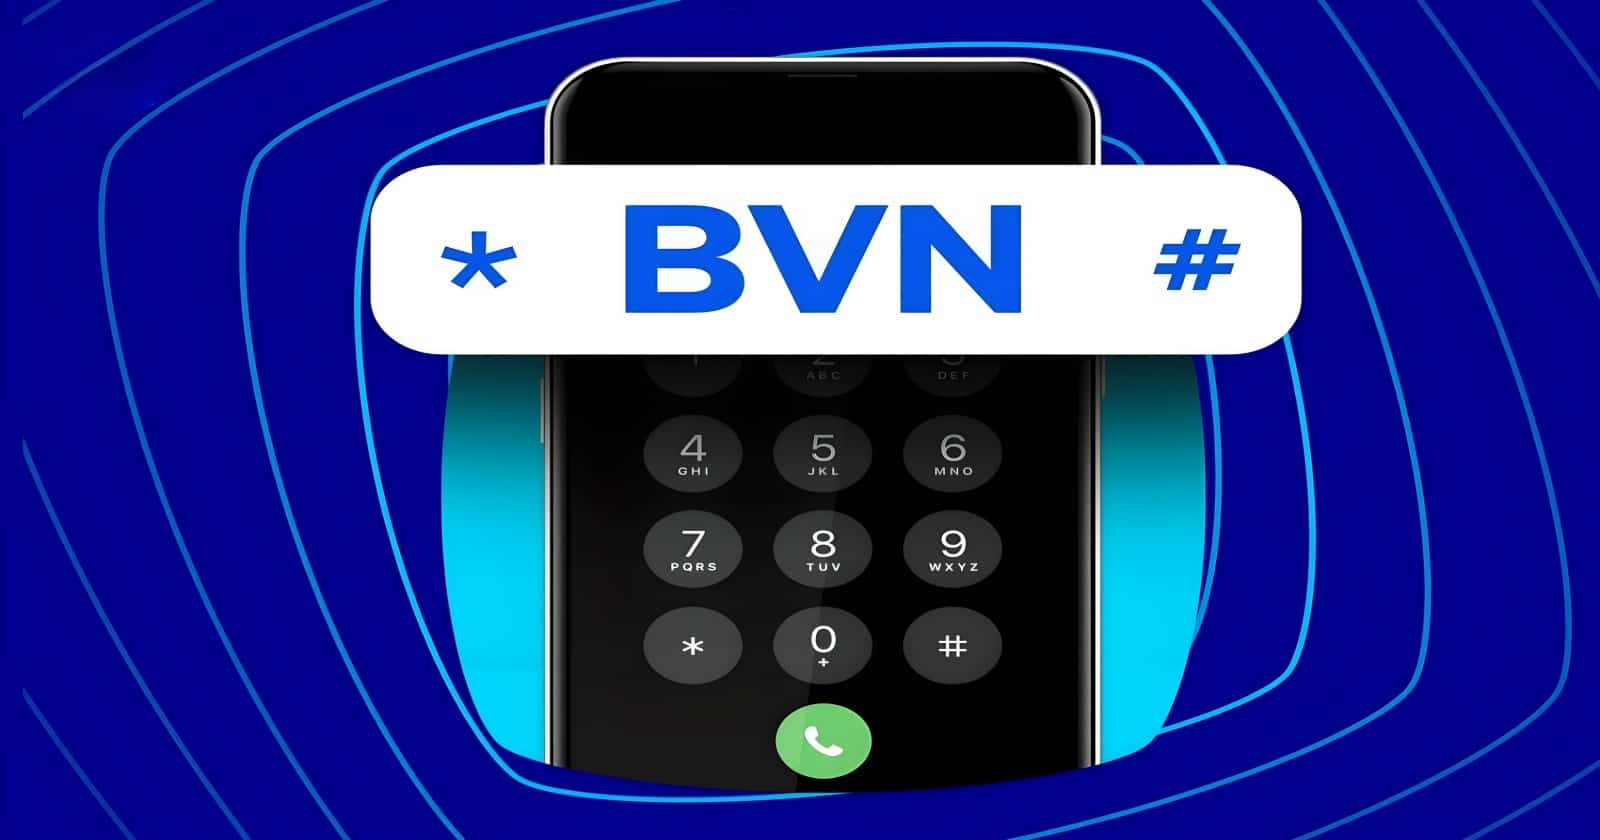 How to Check Your BVN Across All Nigerian Mobile Networks